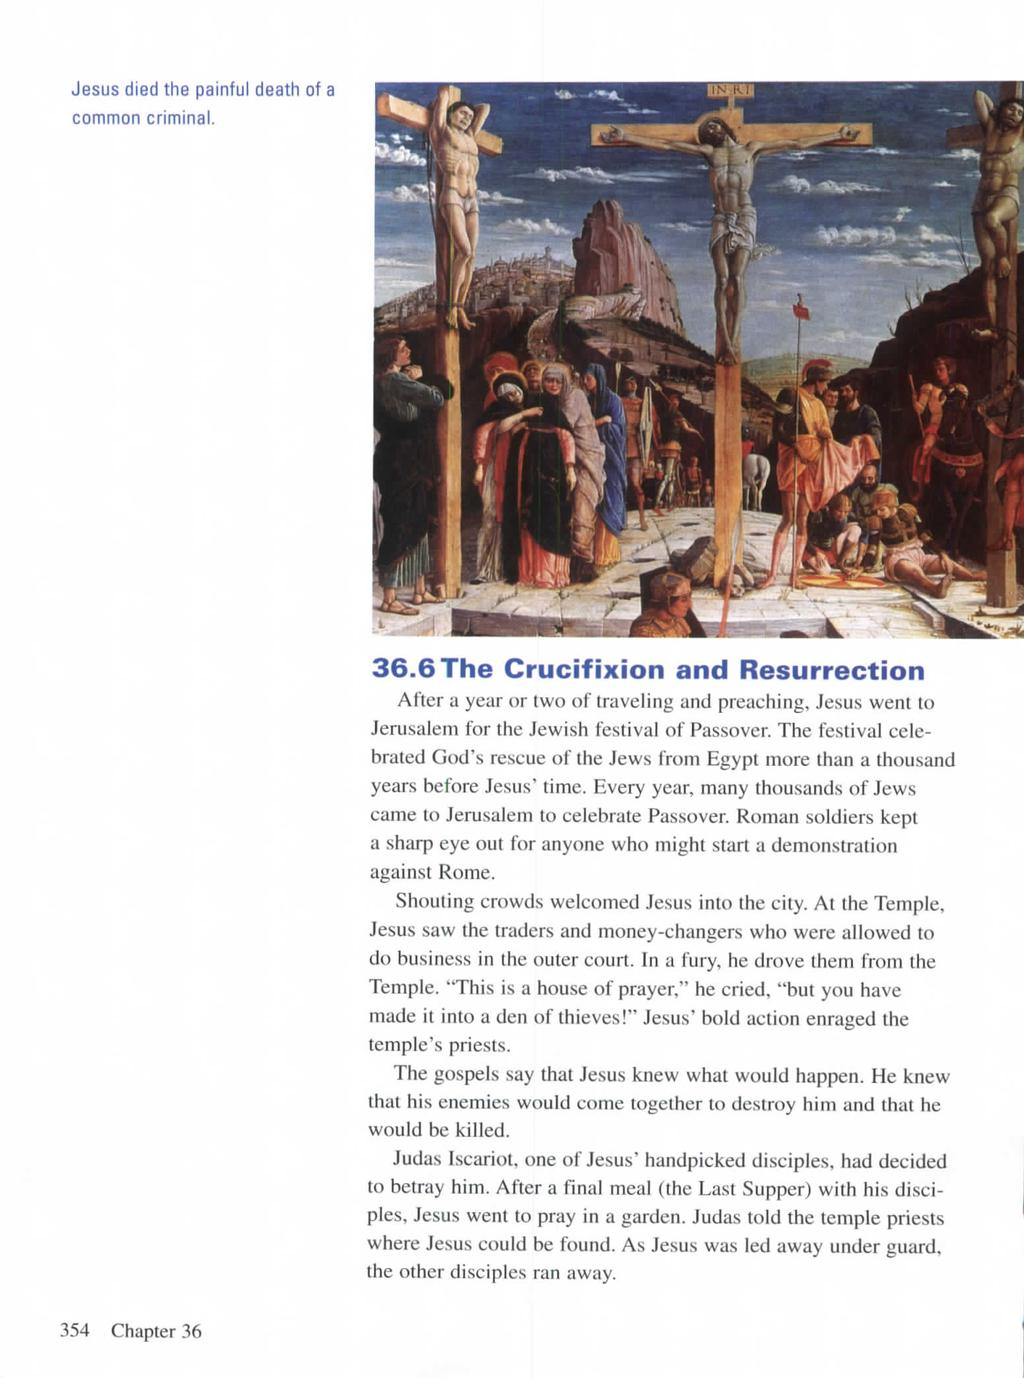 Jesus died the painful death of a common criminal. 36.6 The Crucifixion and Resurrection After a year or two of traveling and preaching, Jesus went to Jerusalem for the Jewish festival of Passover.